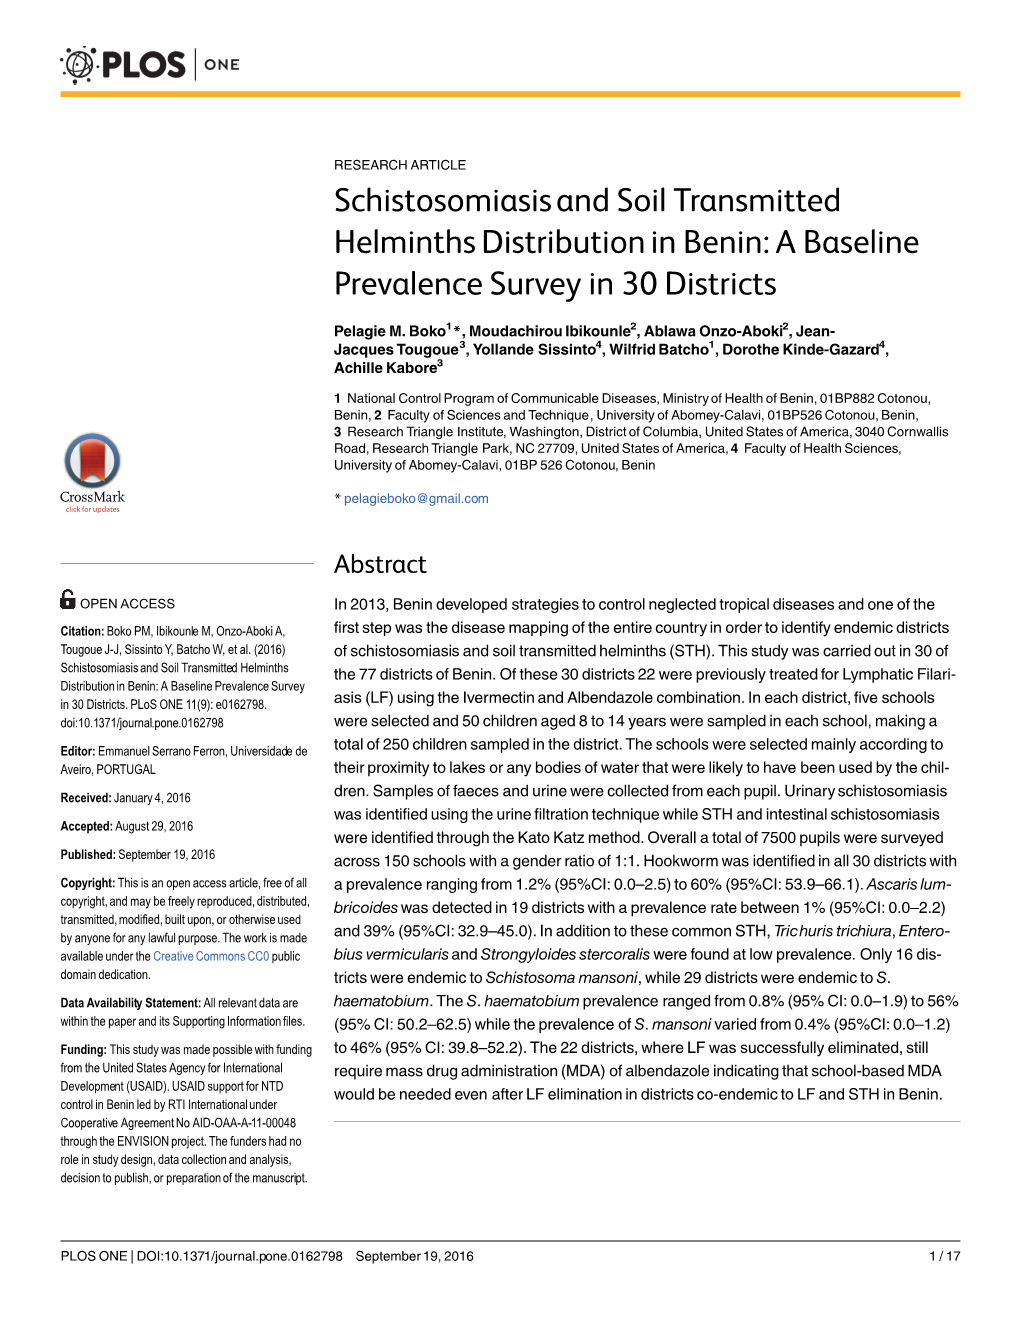 Schistosomiasis and Soil Transmitted Helminths Distribution in Benin: A